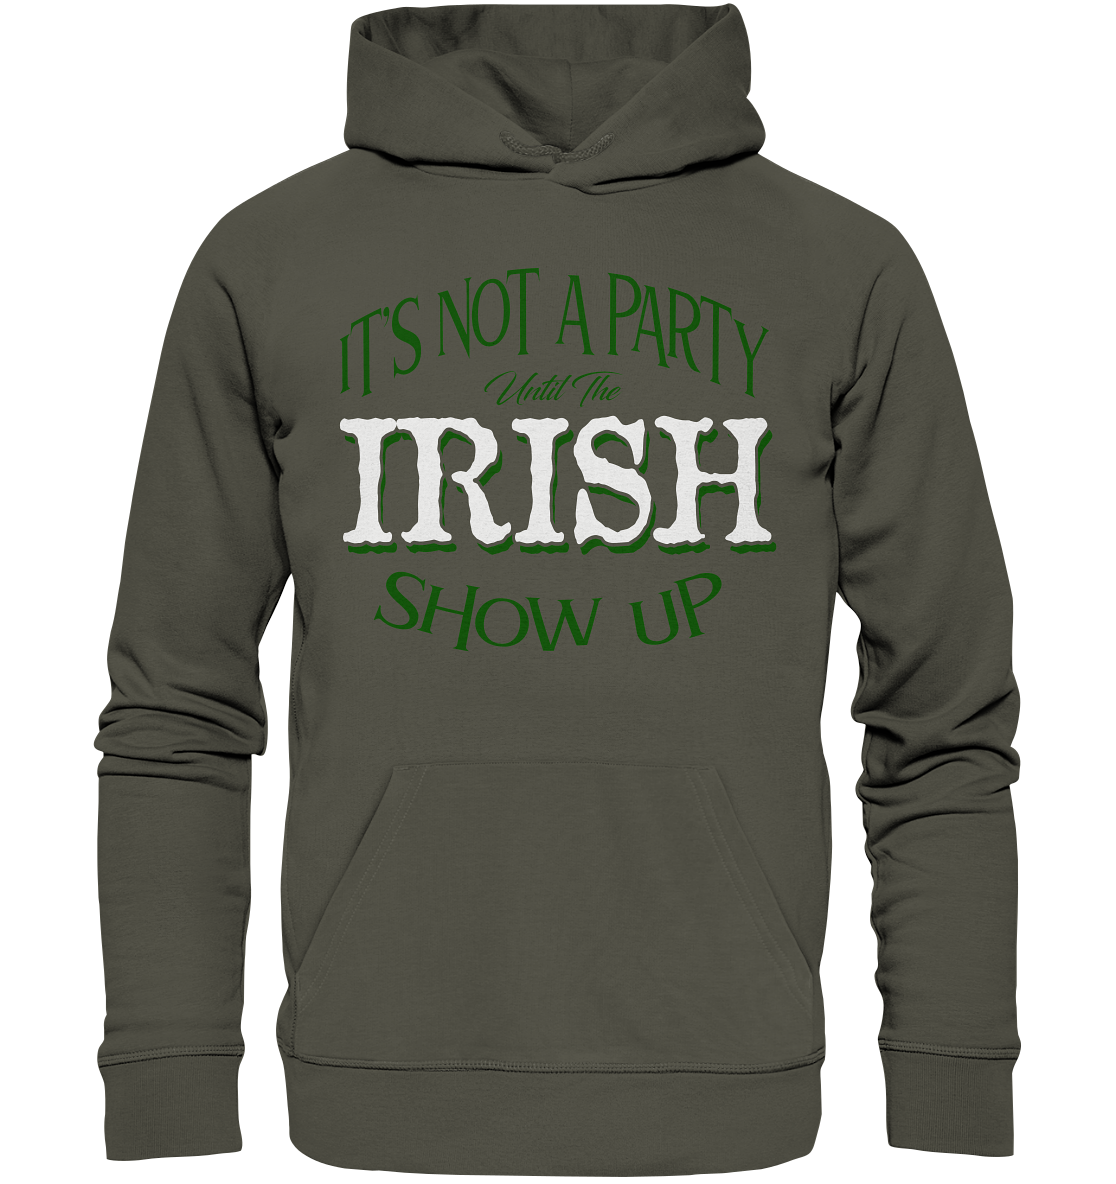 It's Not A Party Until The Irish Show Up - Organic Hoodie